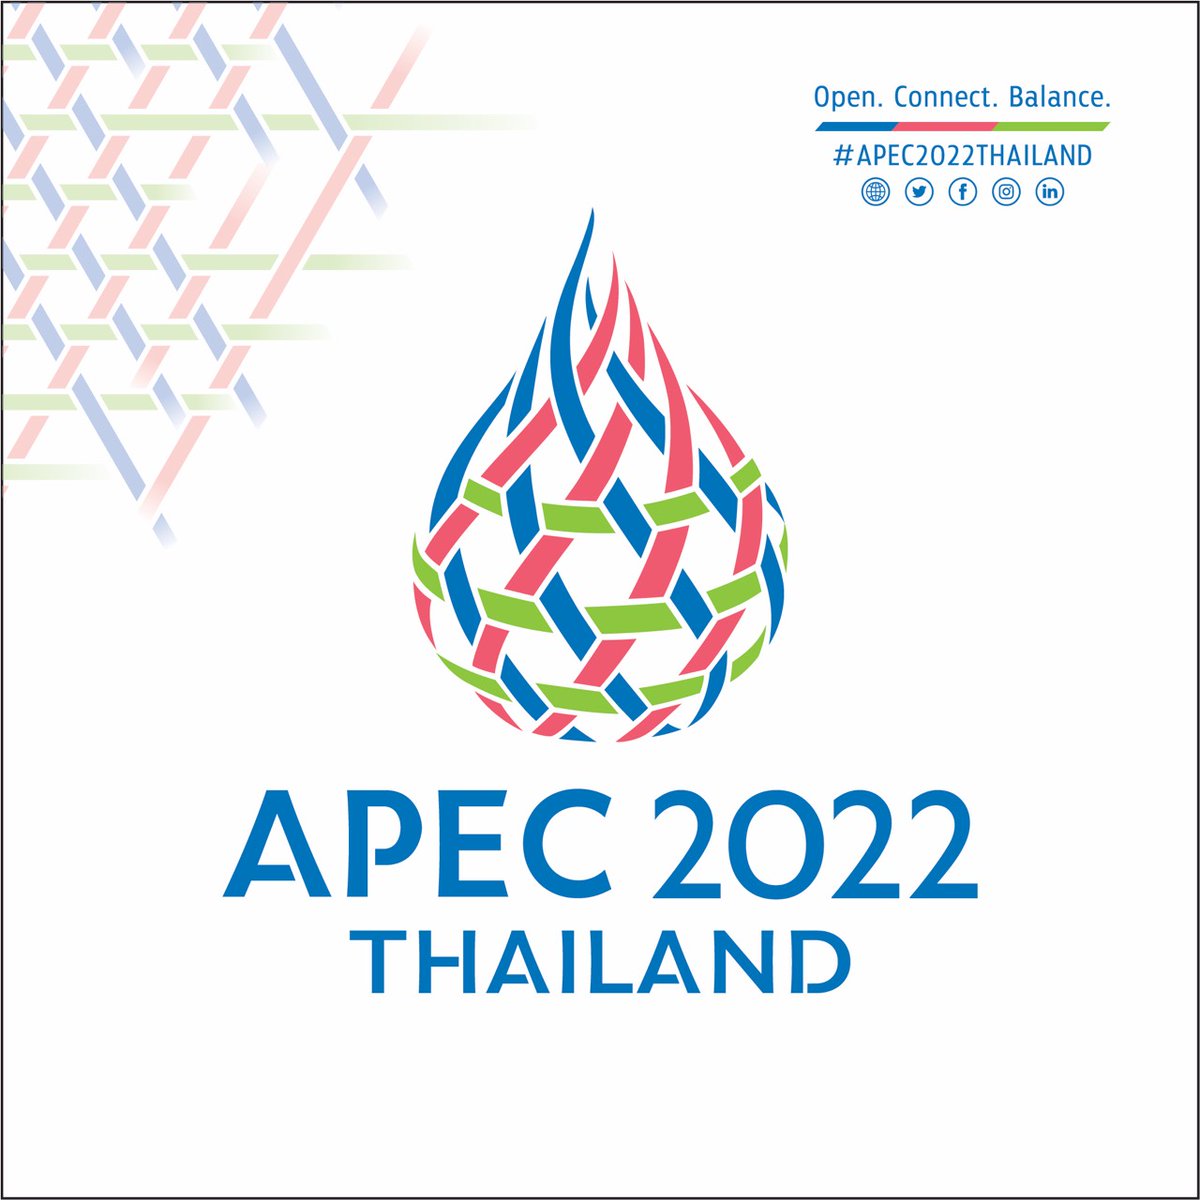 #APEC2022THAILAND Theme 'Open. Connect. Balance.' OPEN to ALL opportunities by facilitating trade & investment. CONNECT in ALL dimensions through safe & seamless resumption of cross-border travel. BALANCE in ALL aspects towards sustainable & inclusive growth.